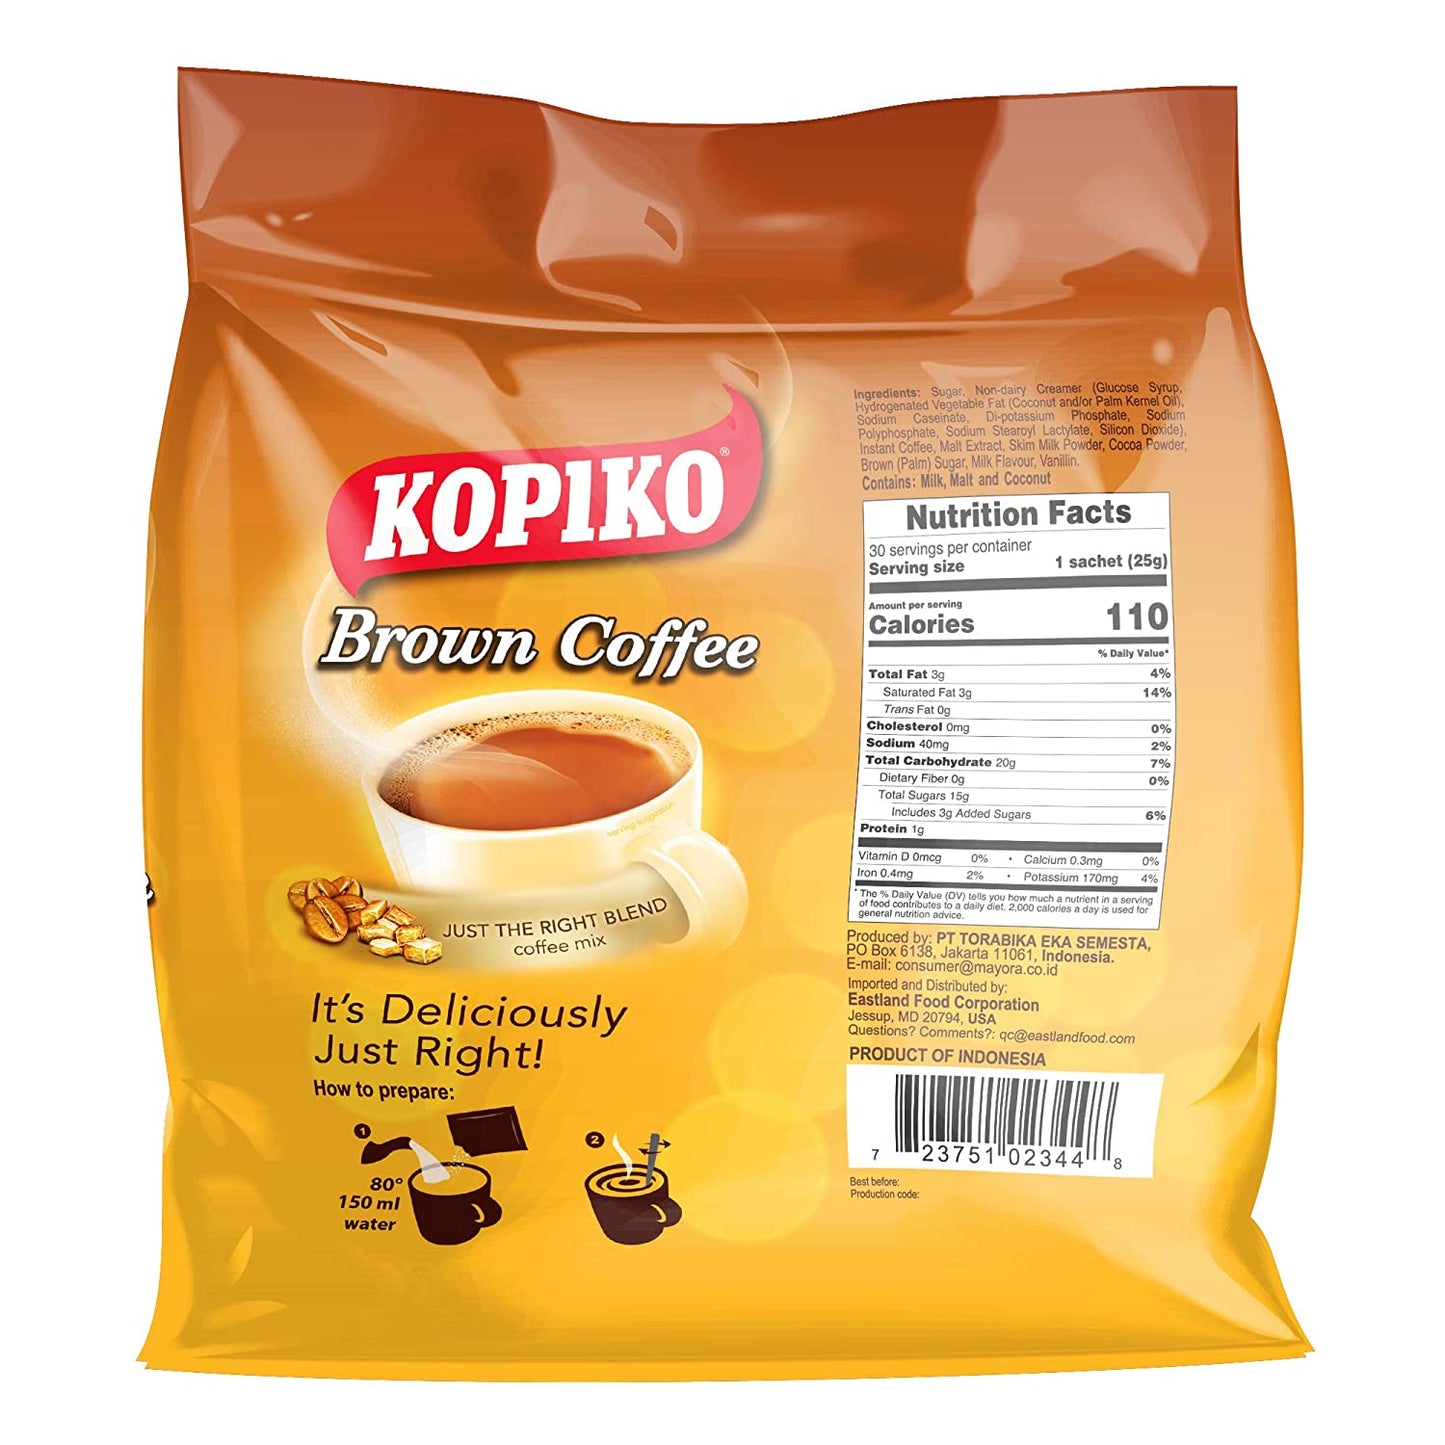 Kopiko Instant 3 In 1 Brown Coffee - 2.65 Ounce (Pack of 30)